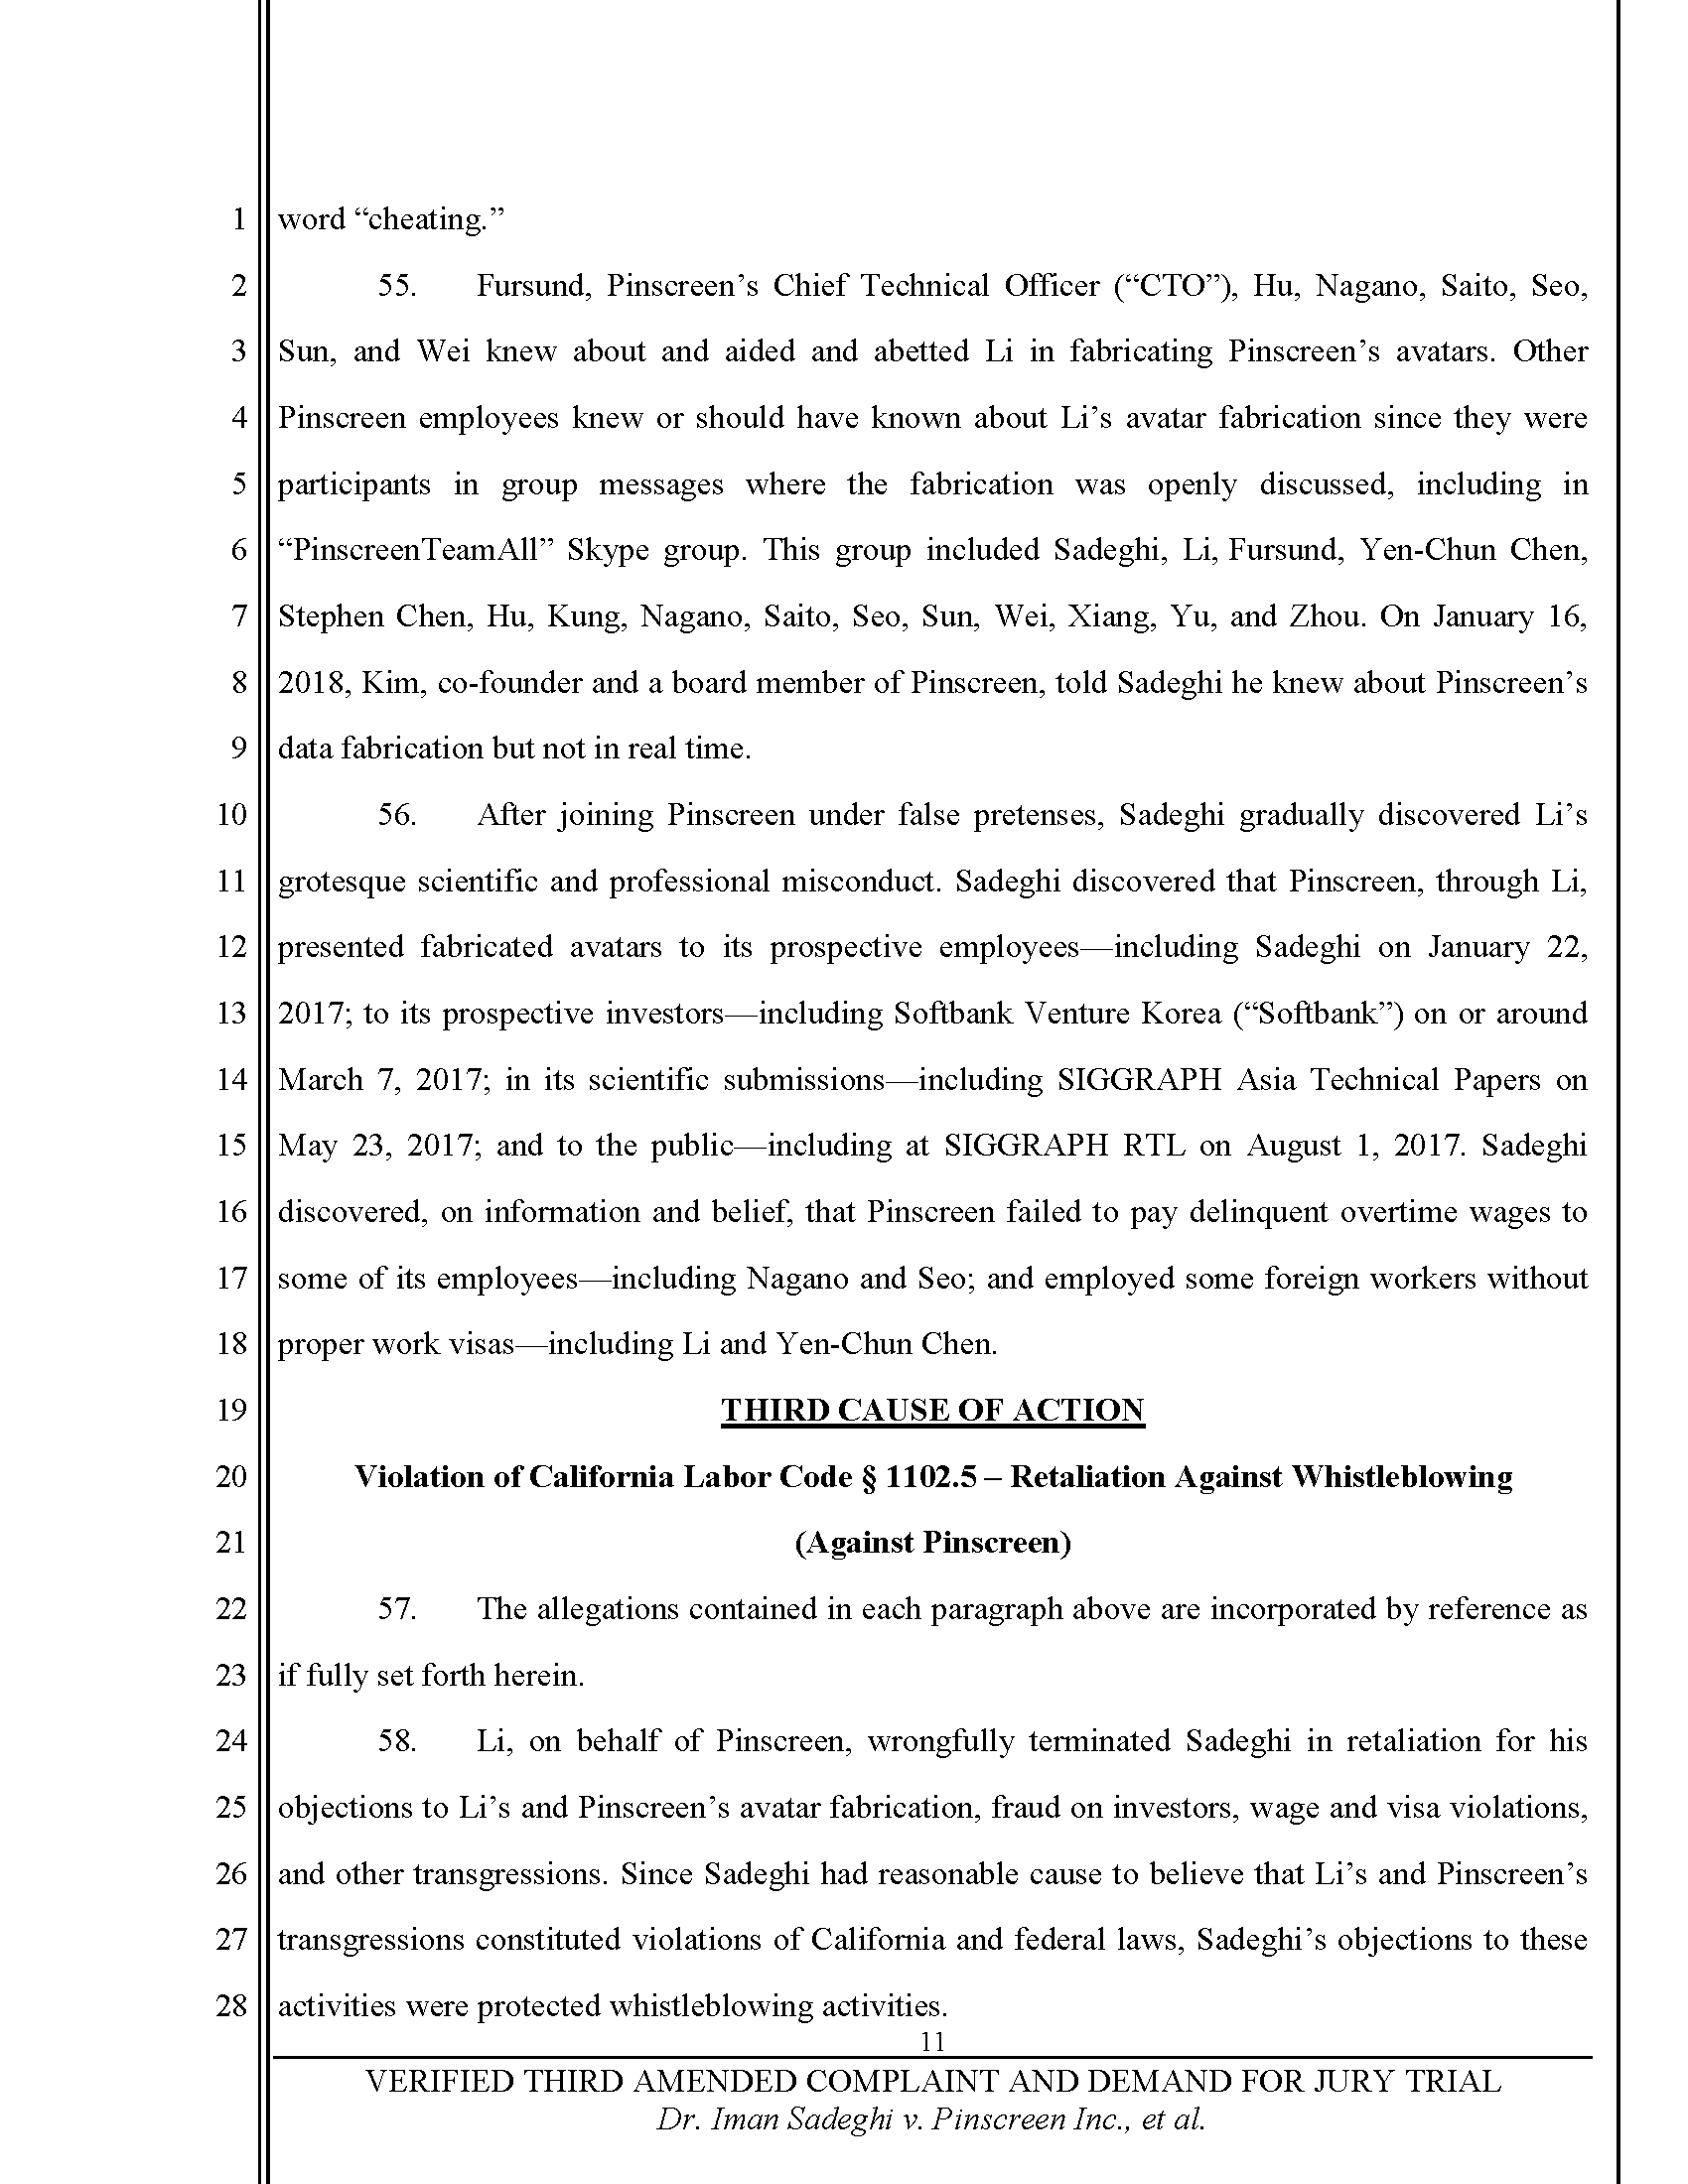 Third Amended Complaint (TAC) Page 12